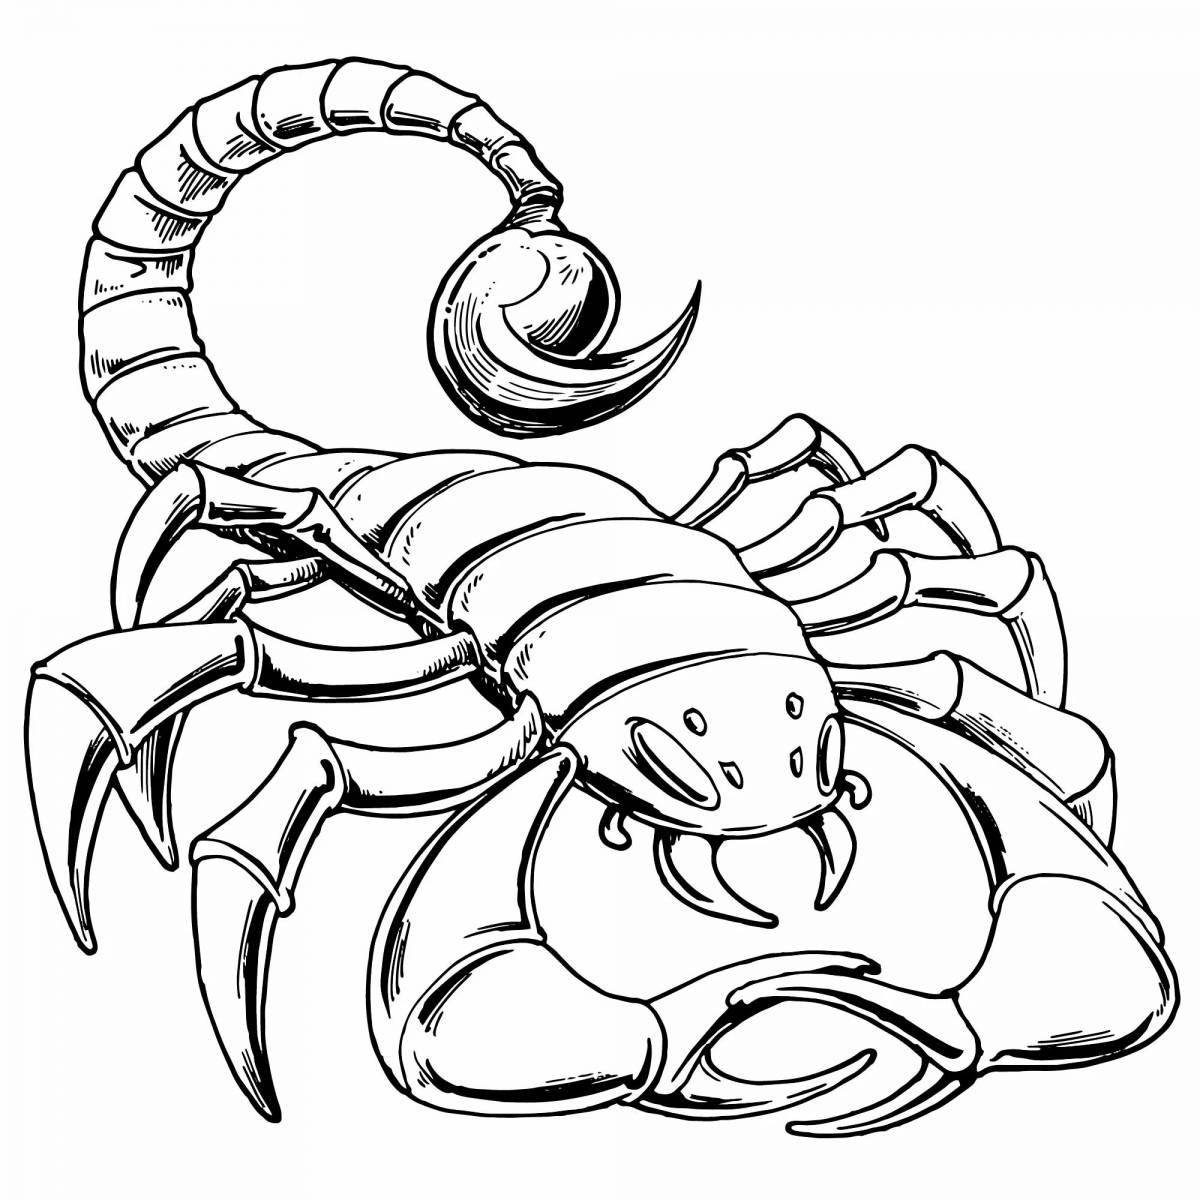 Adorable scorpion coloring book for kids